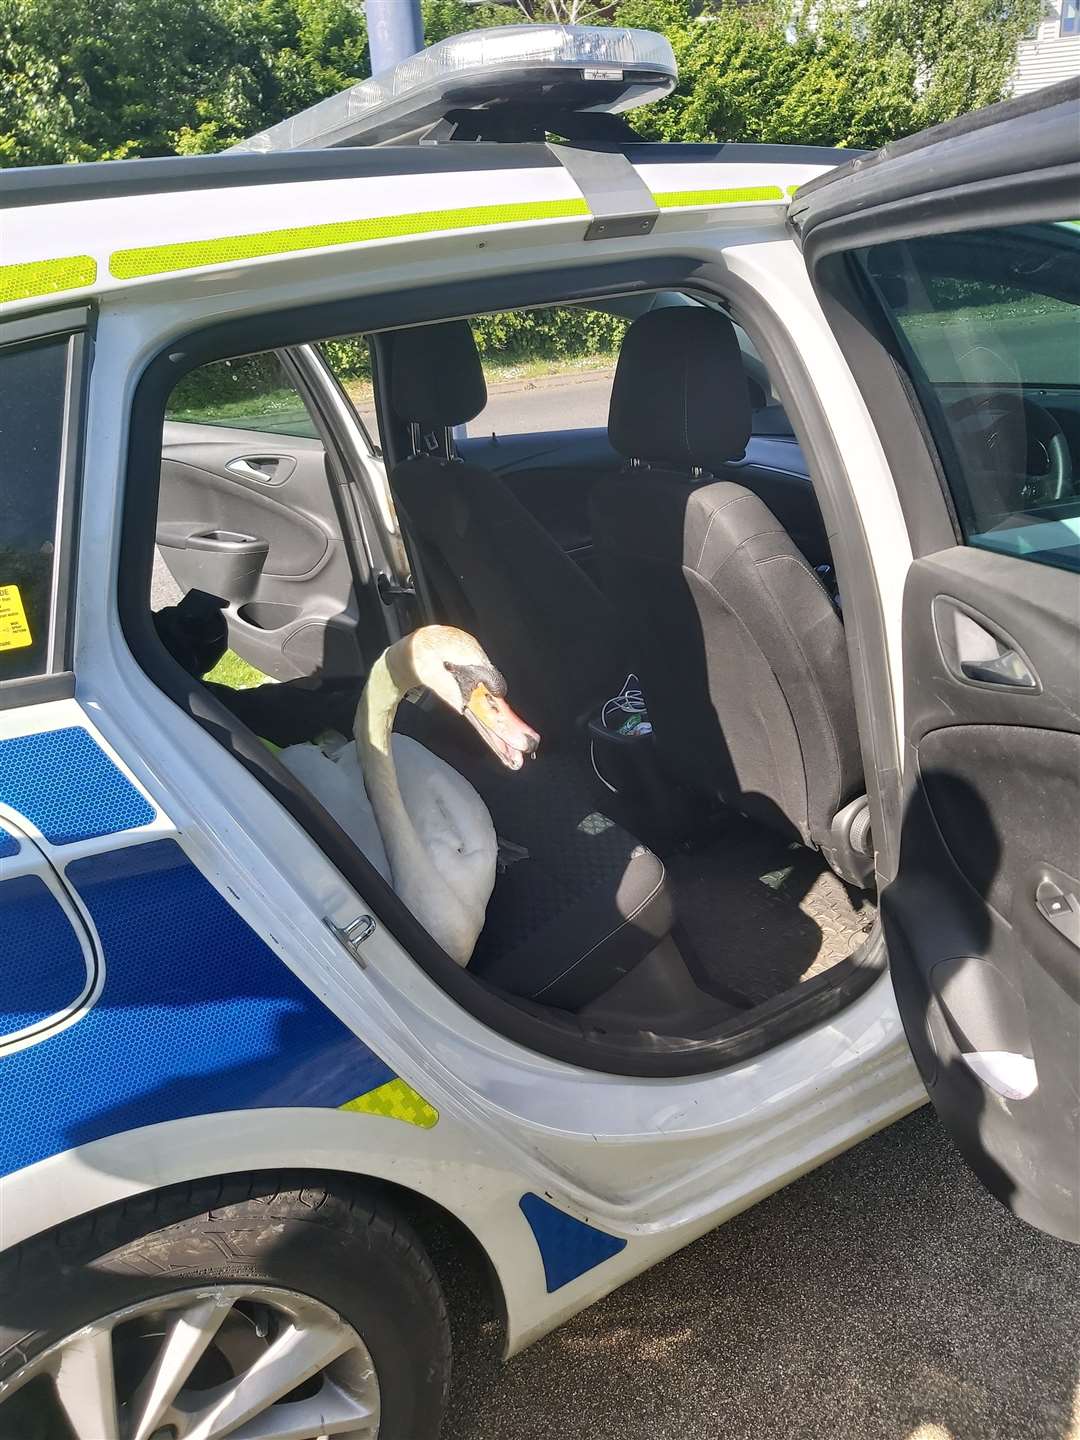 A swan was rescued by police after being found walking along University Way, Dartford